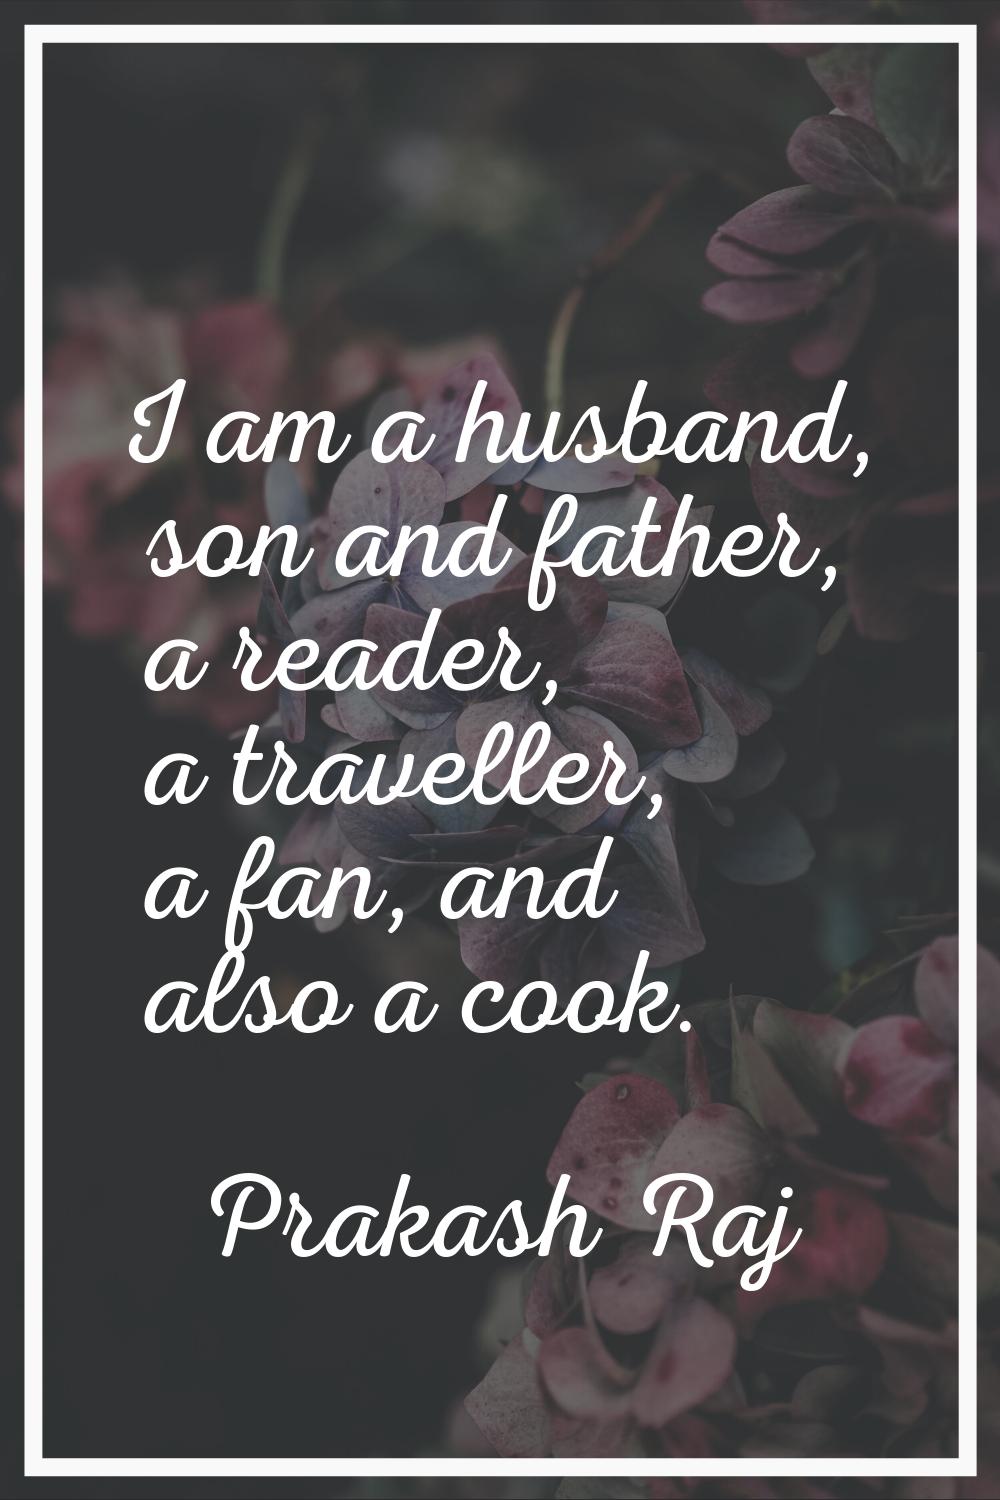 I am a husband, son and father, a reader, a traveller, a fan, and also a cook.